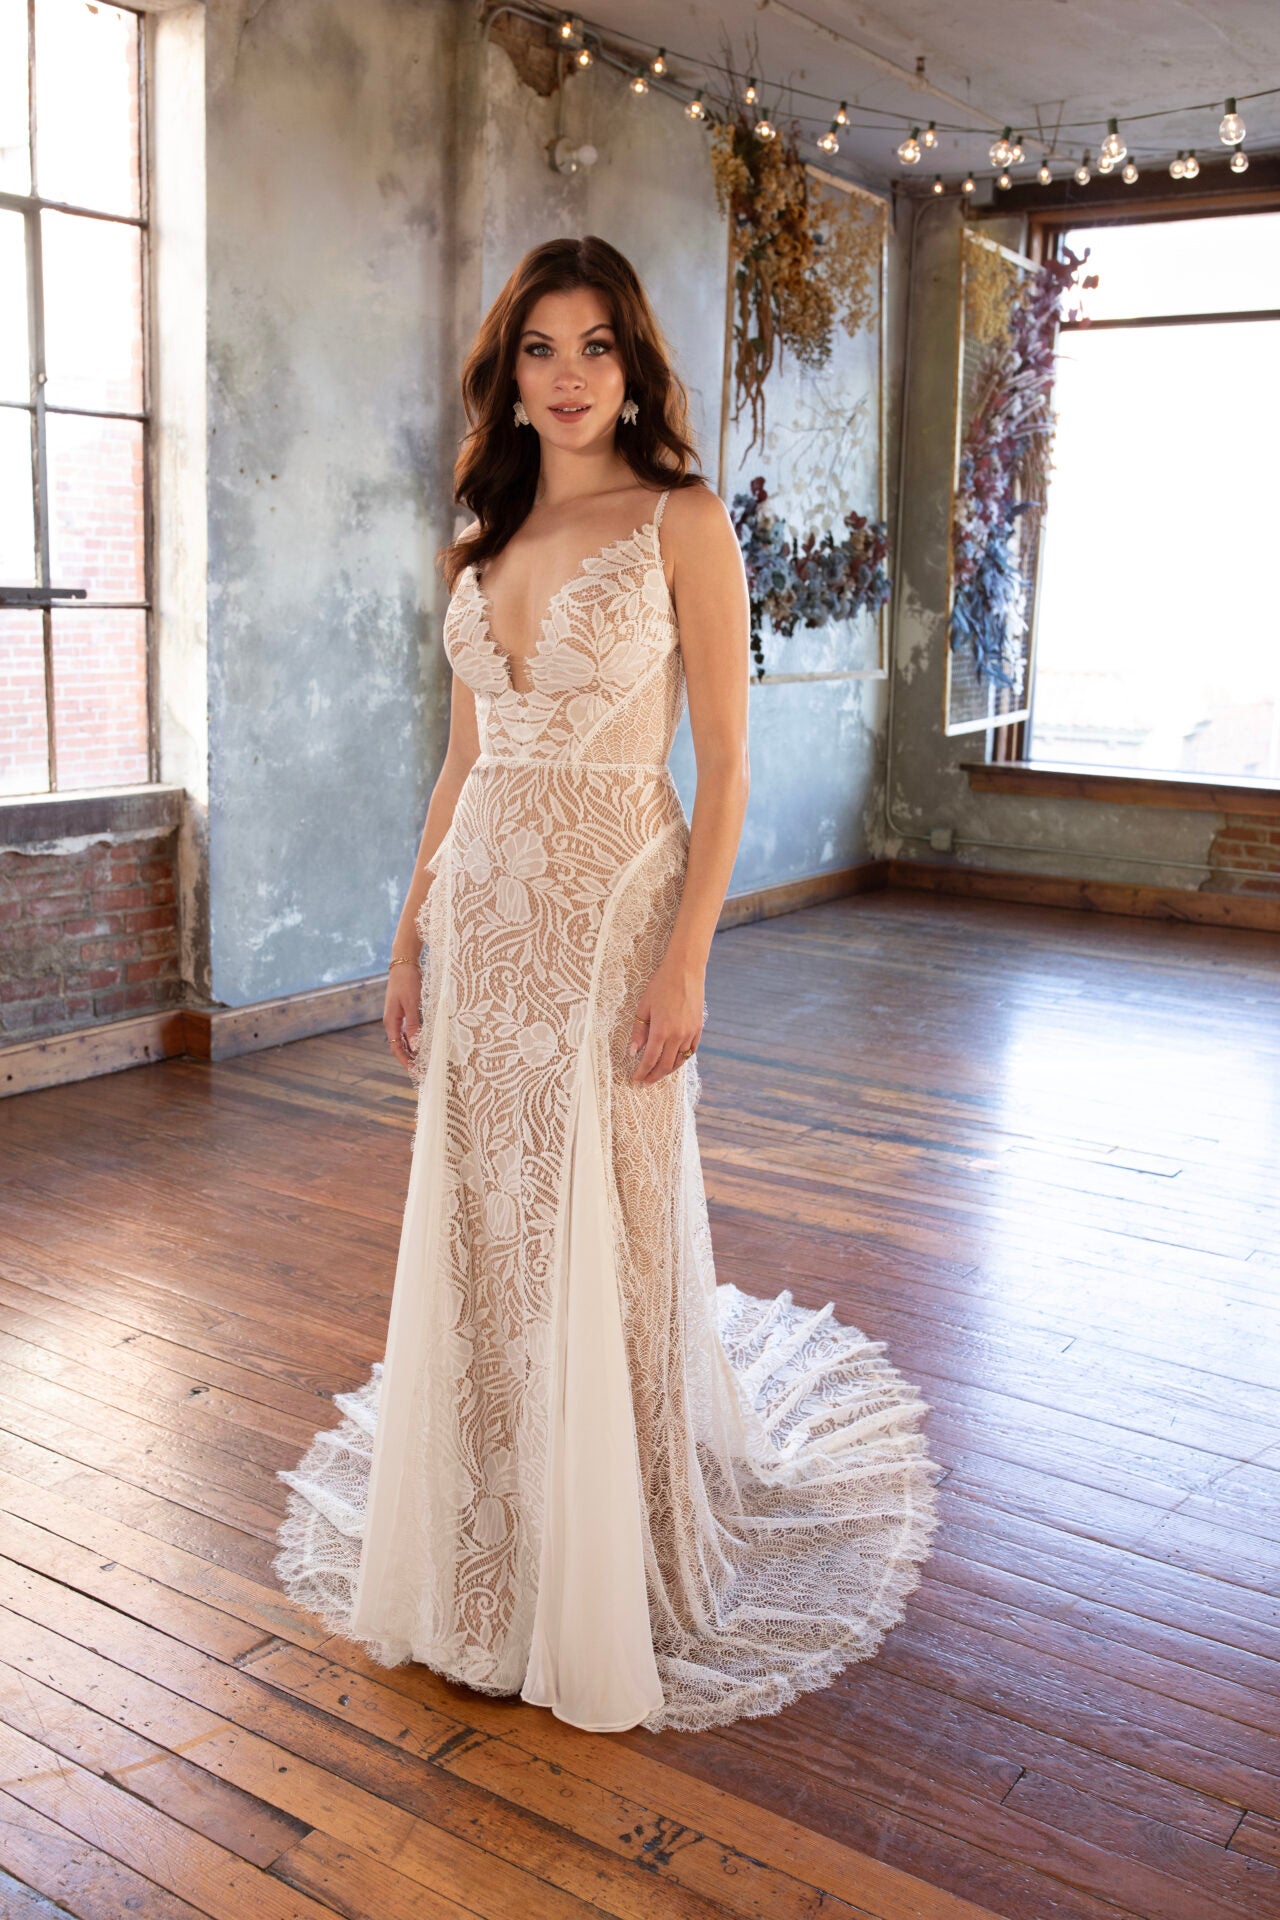 Lace Fit And Flare Wedding Dress With Deep V-neckline by All Who Wander - Image 1